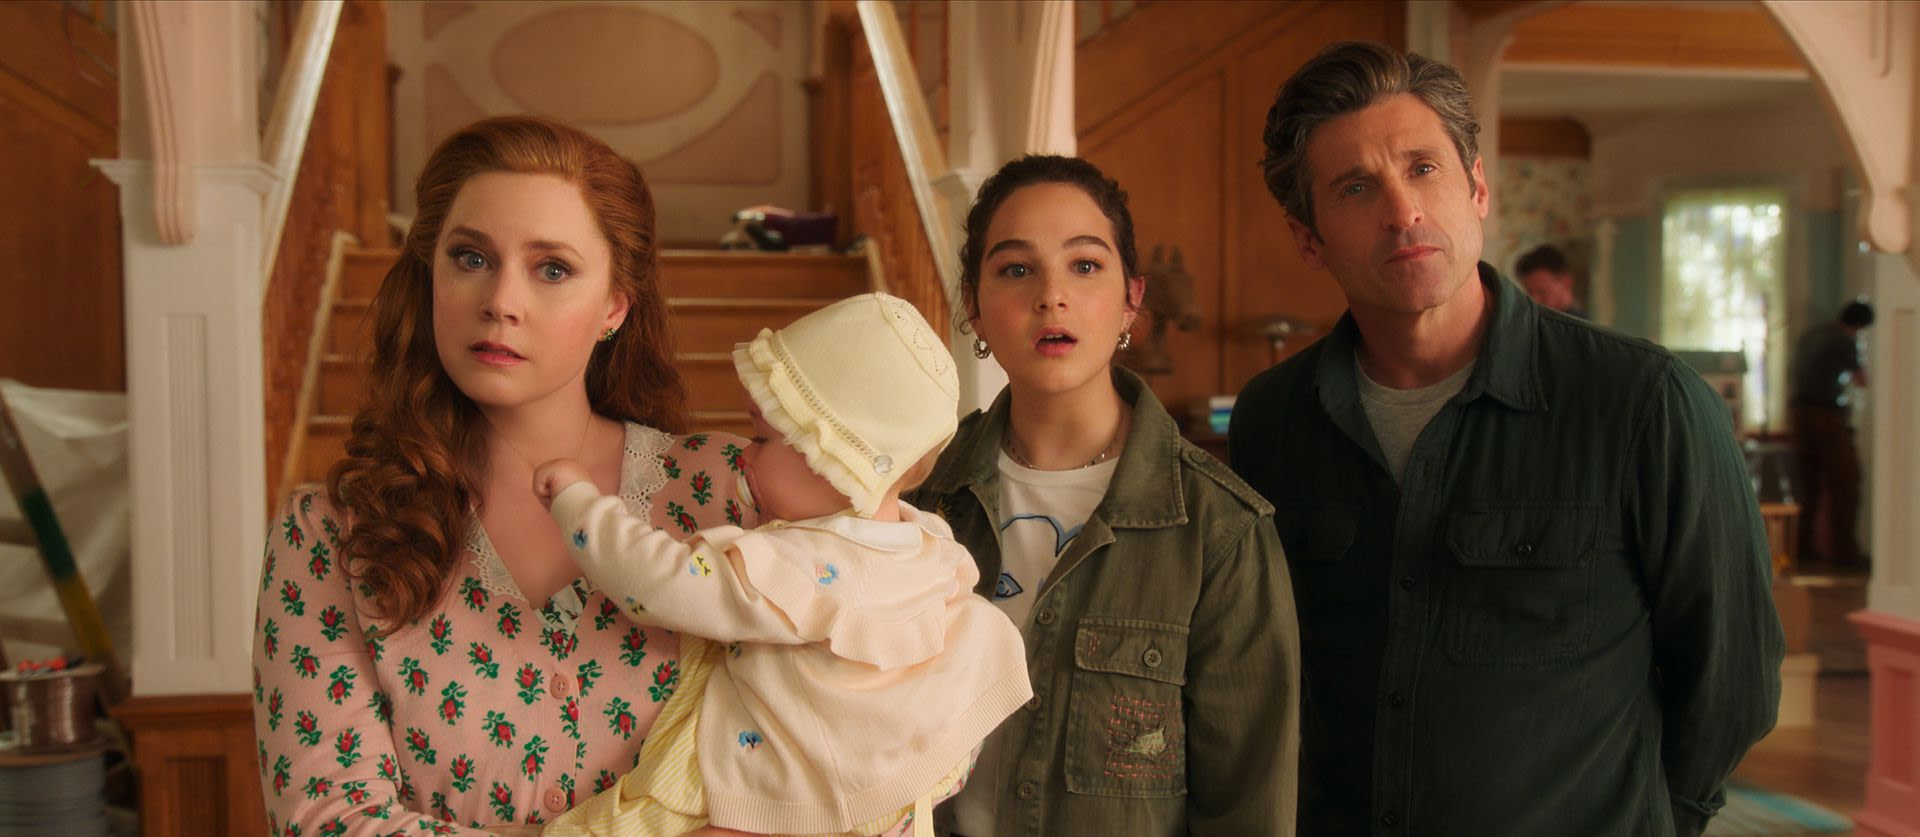 A red-haired woman in a pink floral shirt (Amy Adams) holds a baby beside a young girl in a green coat (Morgan Philip) and a man (Patrick Dempsey) while standing in front of a staircase and living room.